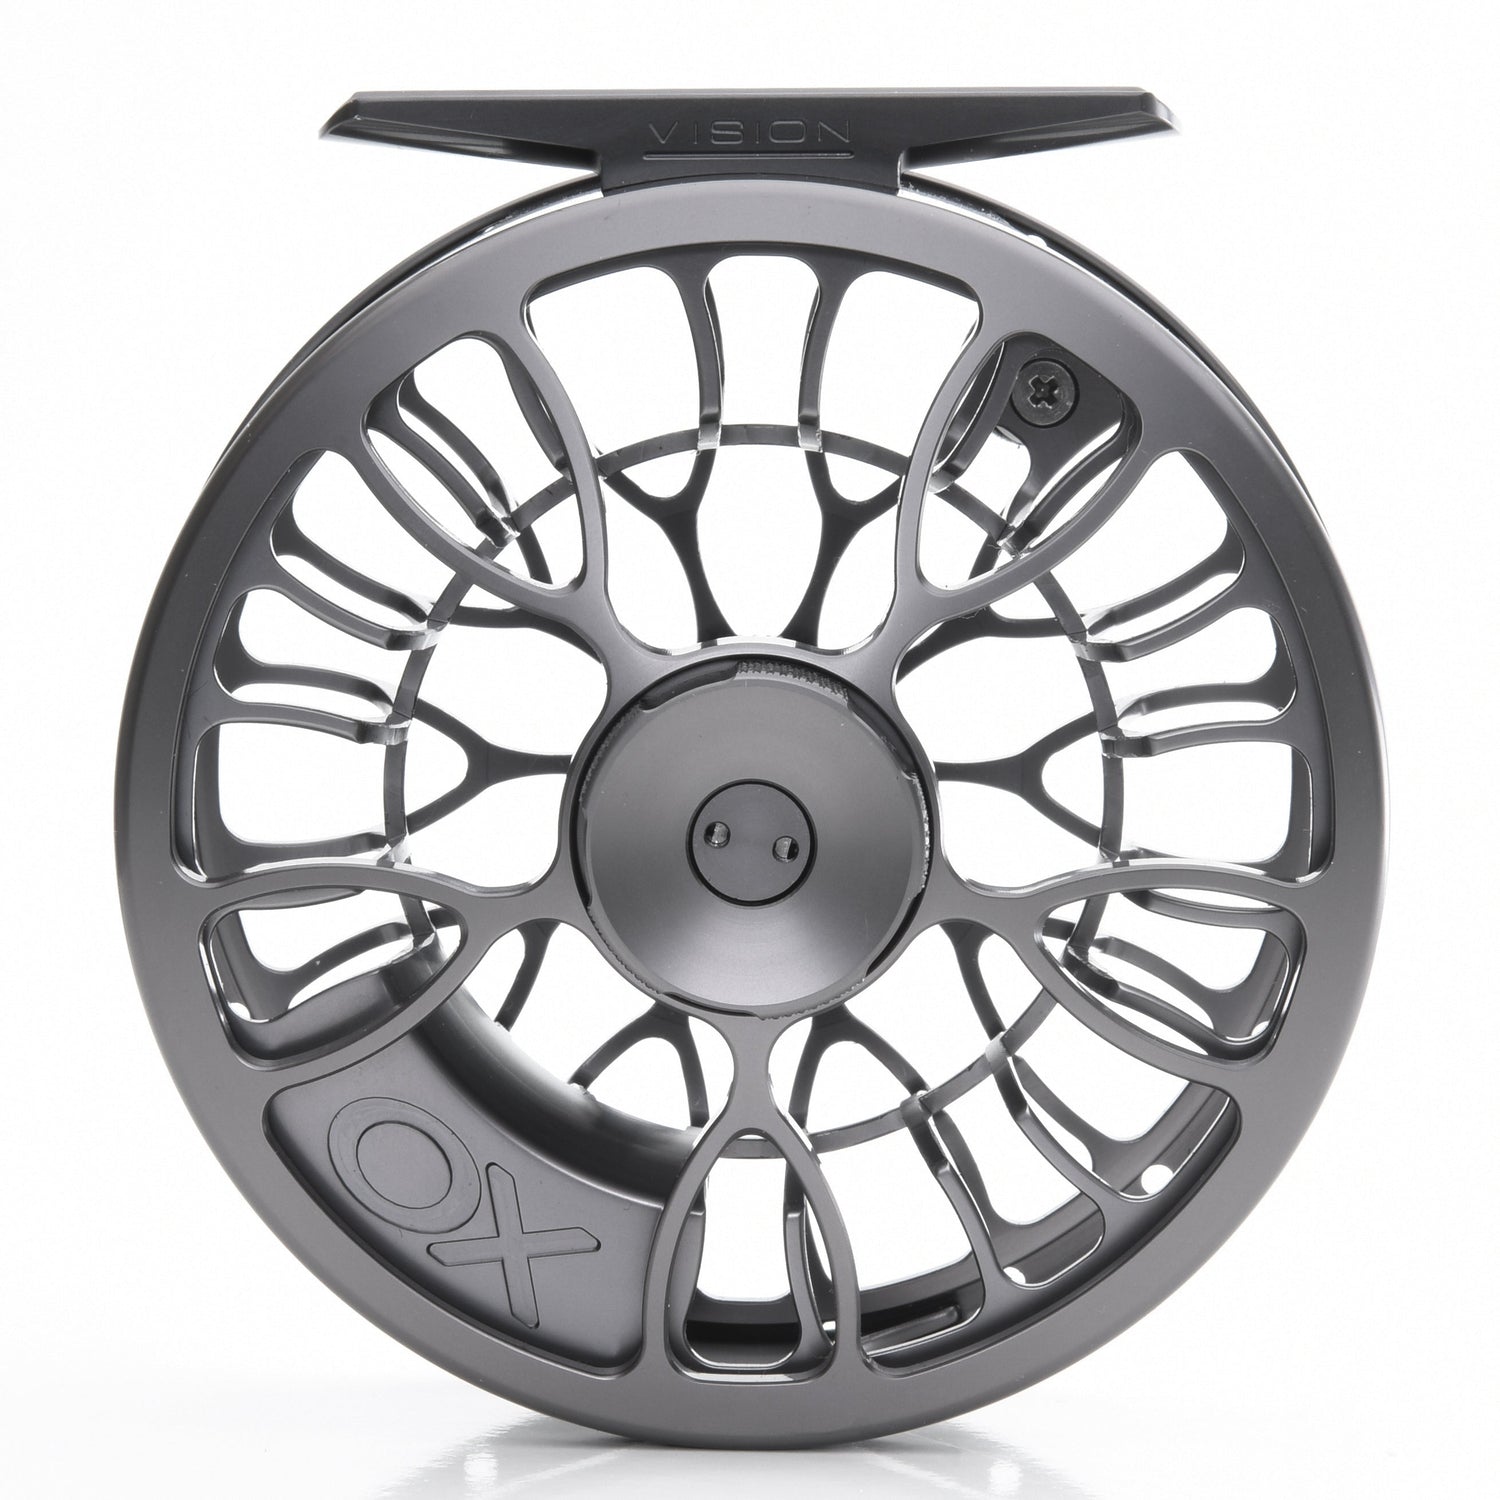 3 In 1 Reel Case – Vision Fly Fishing